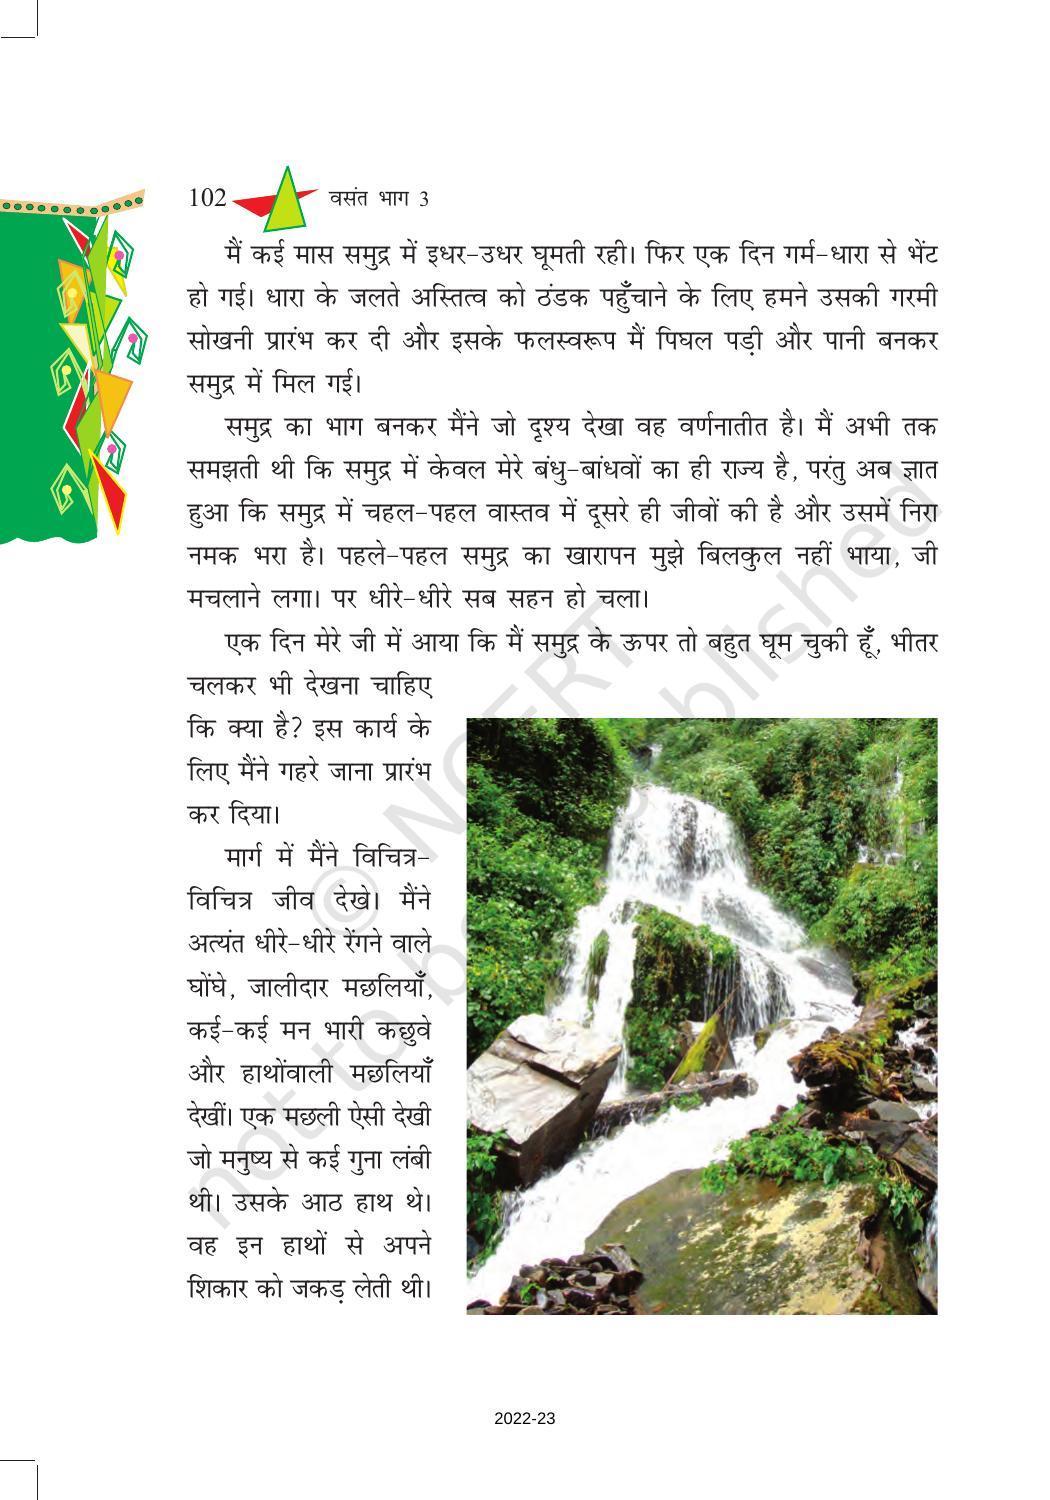 NCERT Book for Class 8 Hindi Vasant Chapter 16 पानी की कहानी - Page 5